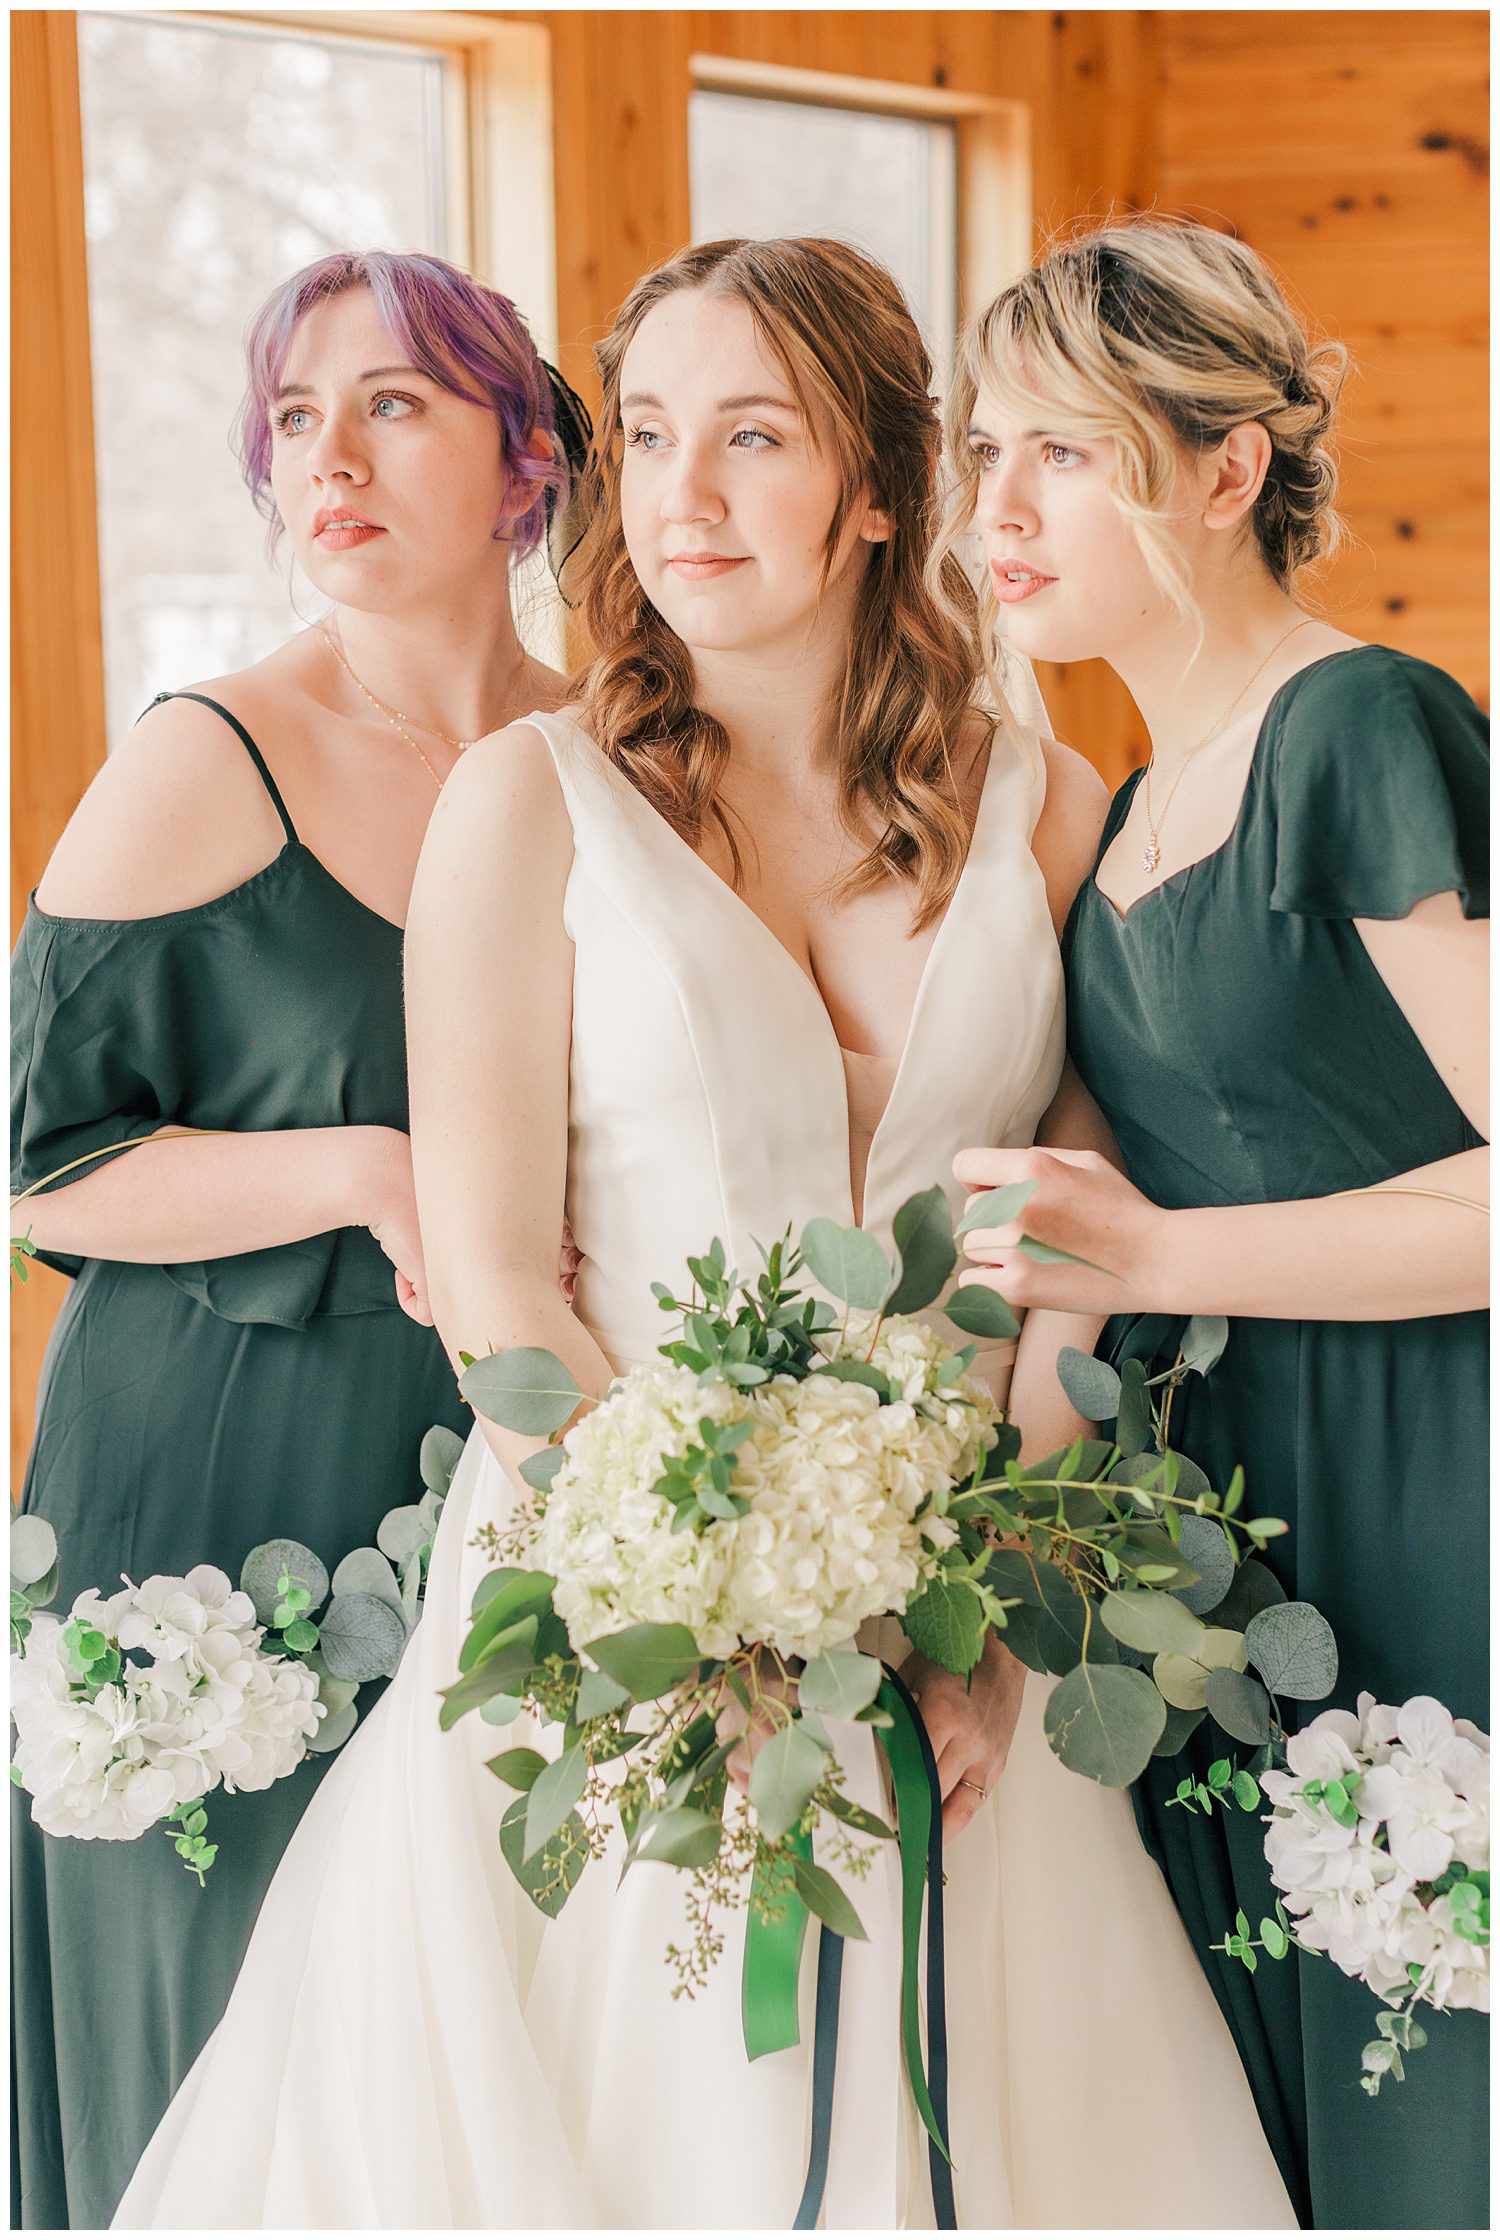 Raven and her bridesmaids dressed in emerald green, holding white hydrangea and eucalyptus hoop bouquets | CB Studio